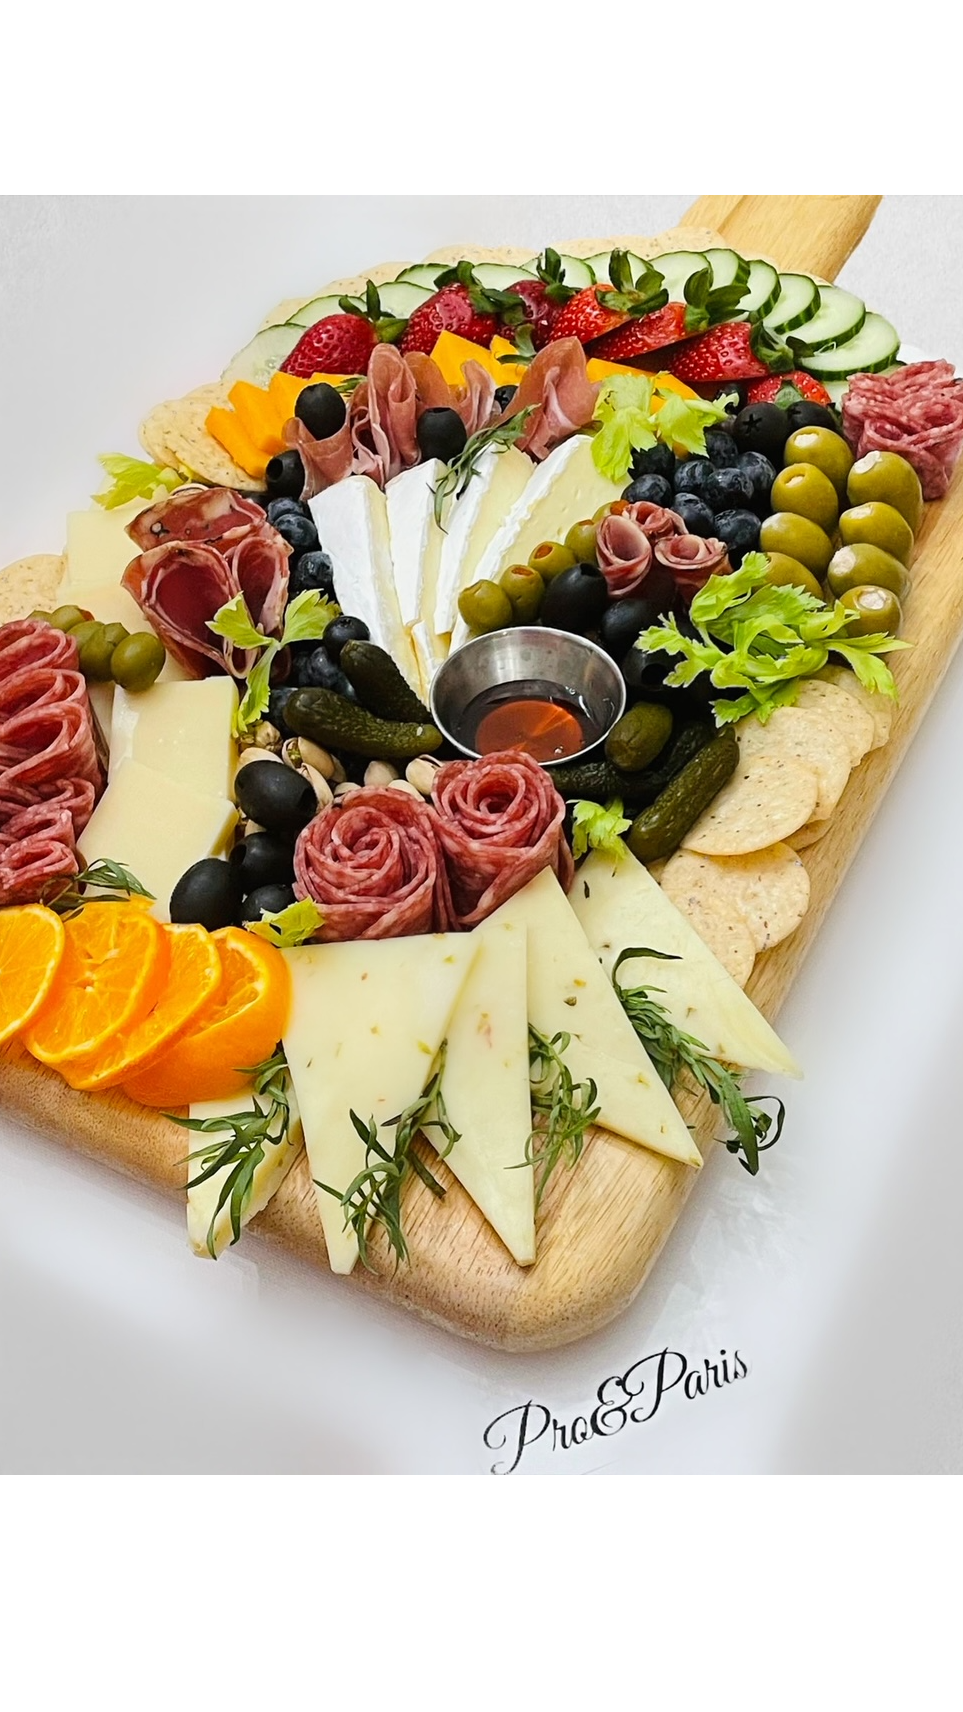 Get Delicious Meat & Cheese Platters Delivered To Your Cooper City Office